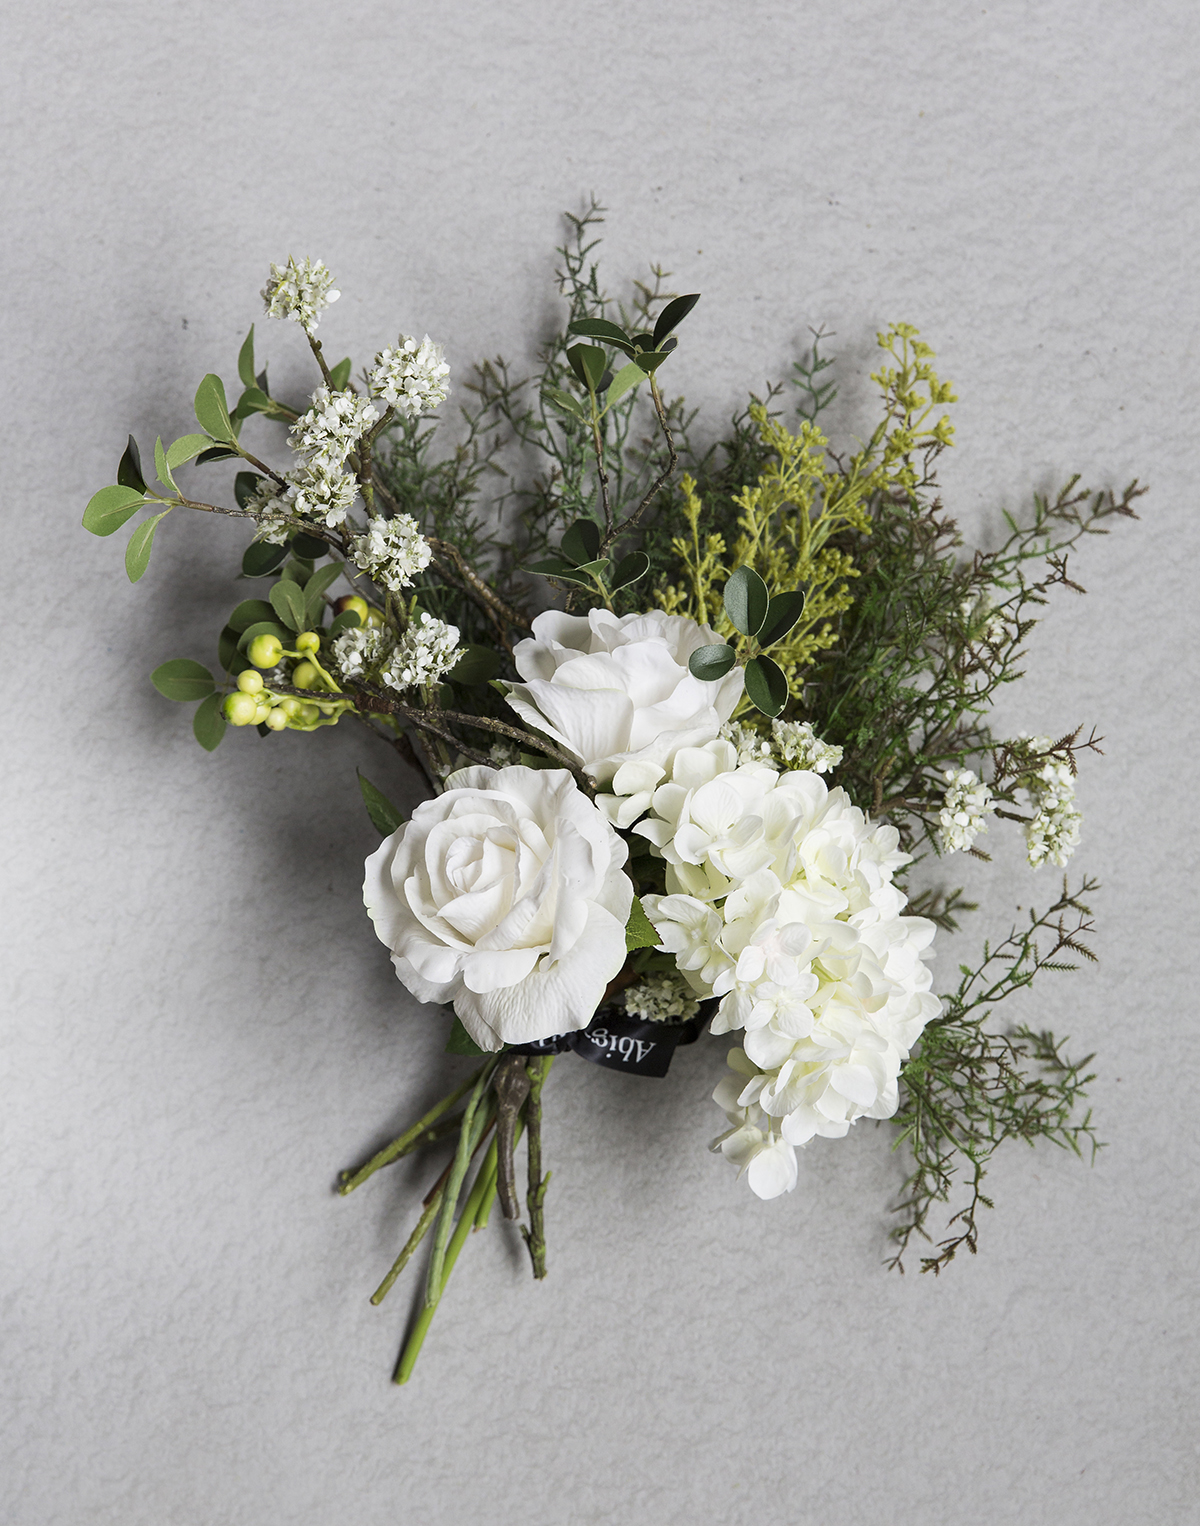 Woburn Bouquet, Abigail Ahern, £110Buy flowers that will last forever like these super-realistic faux bouquets from Abigail Ahern. 